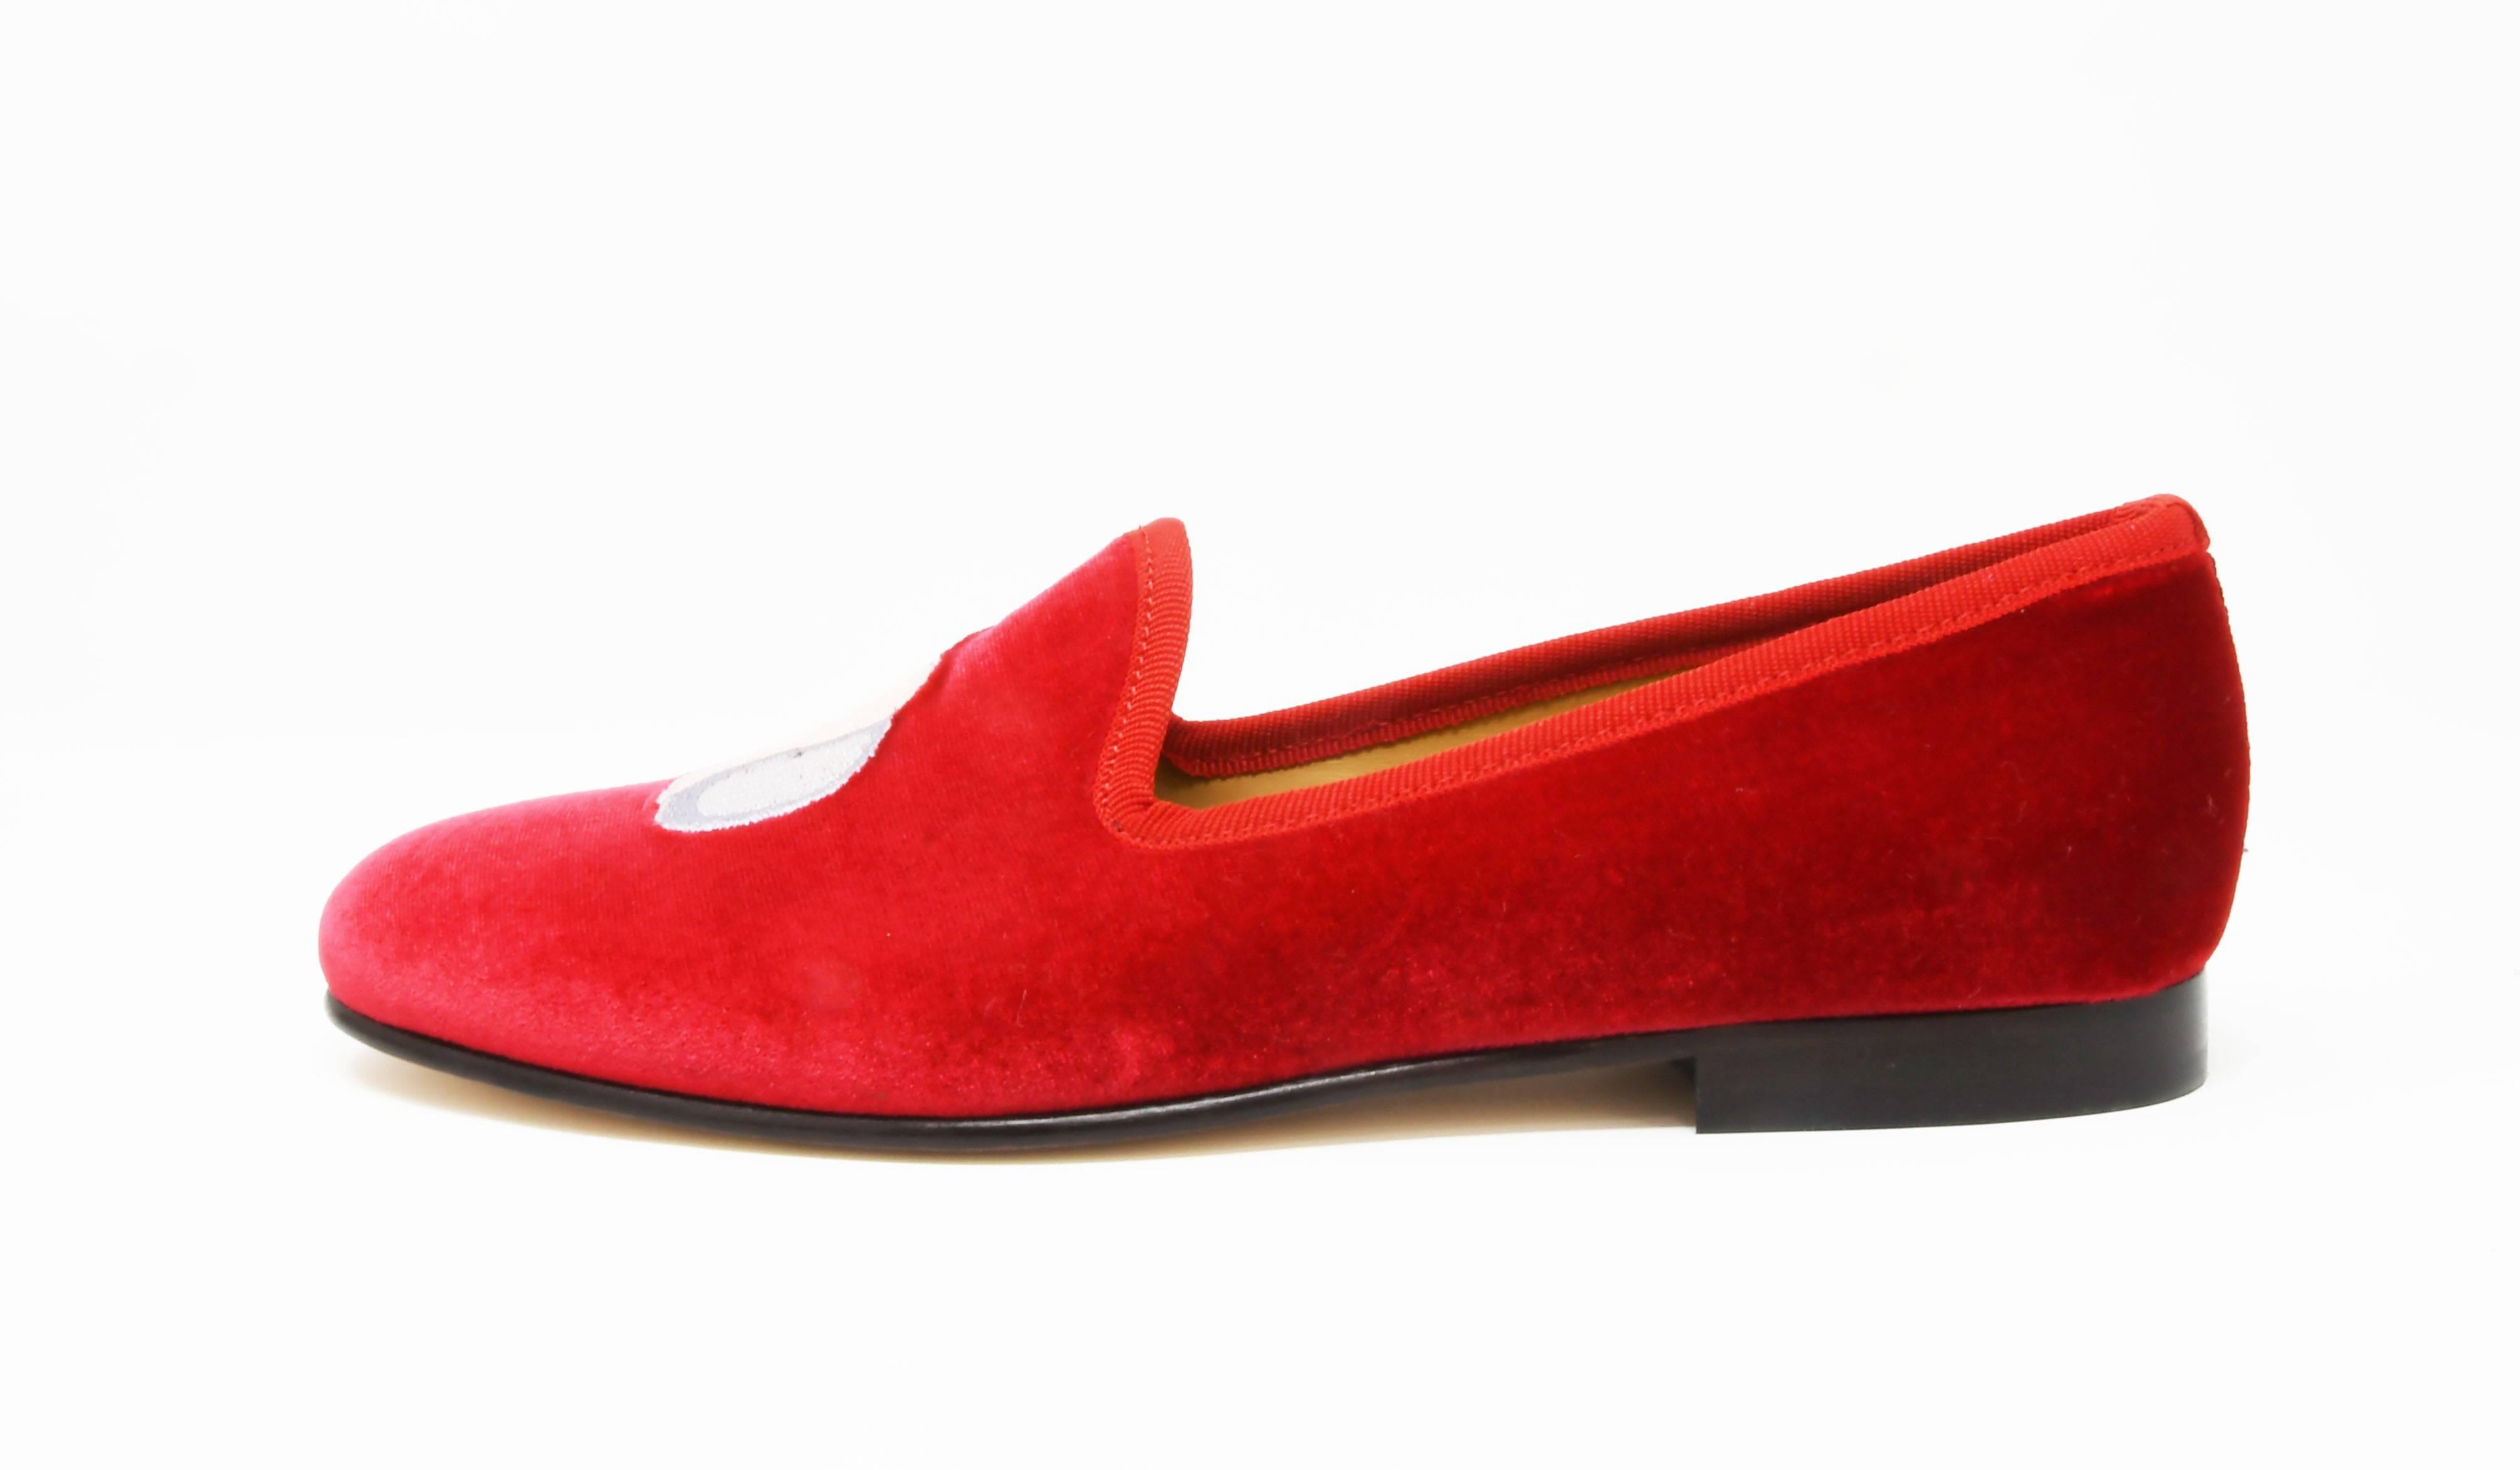 Classic velvet vibrant red Del Toro Bombshell smoking flats feel modern and playful detailed with bomb and seashell embroidery.  Spice up your wardrobe and get noticed in these shoes.  Size 7